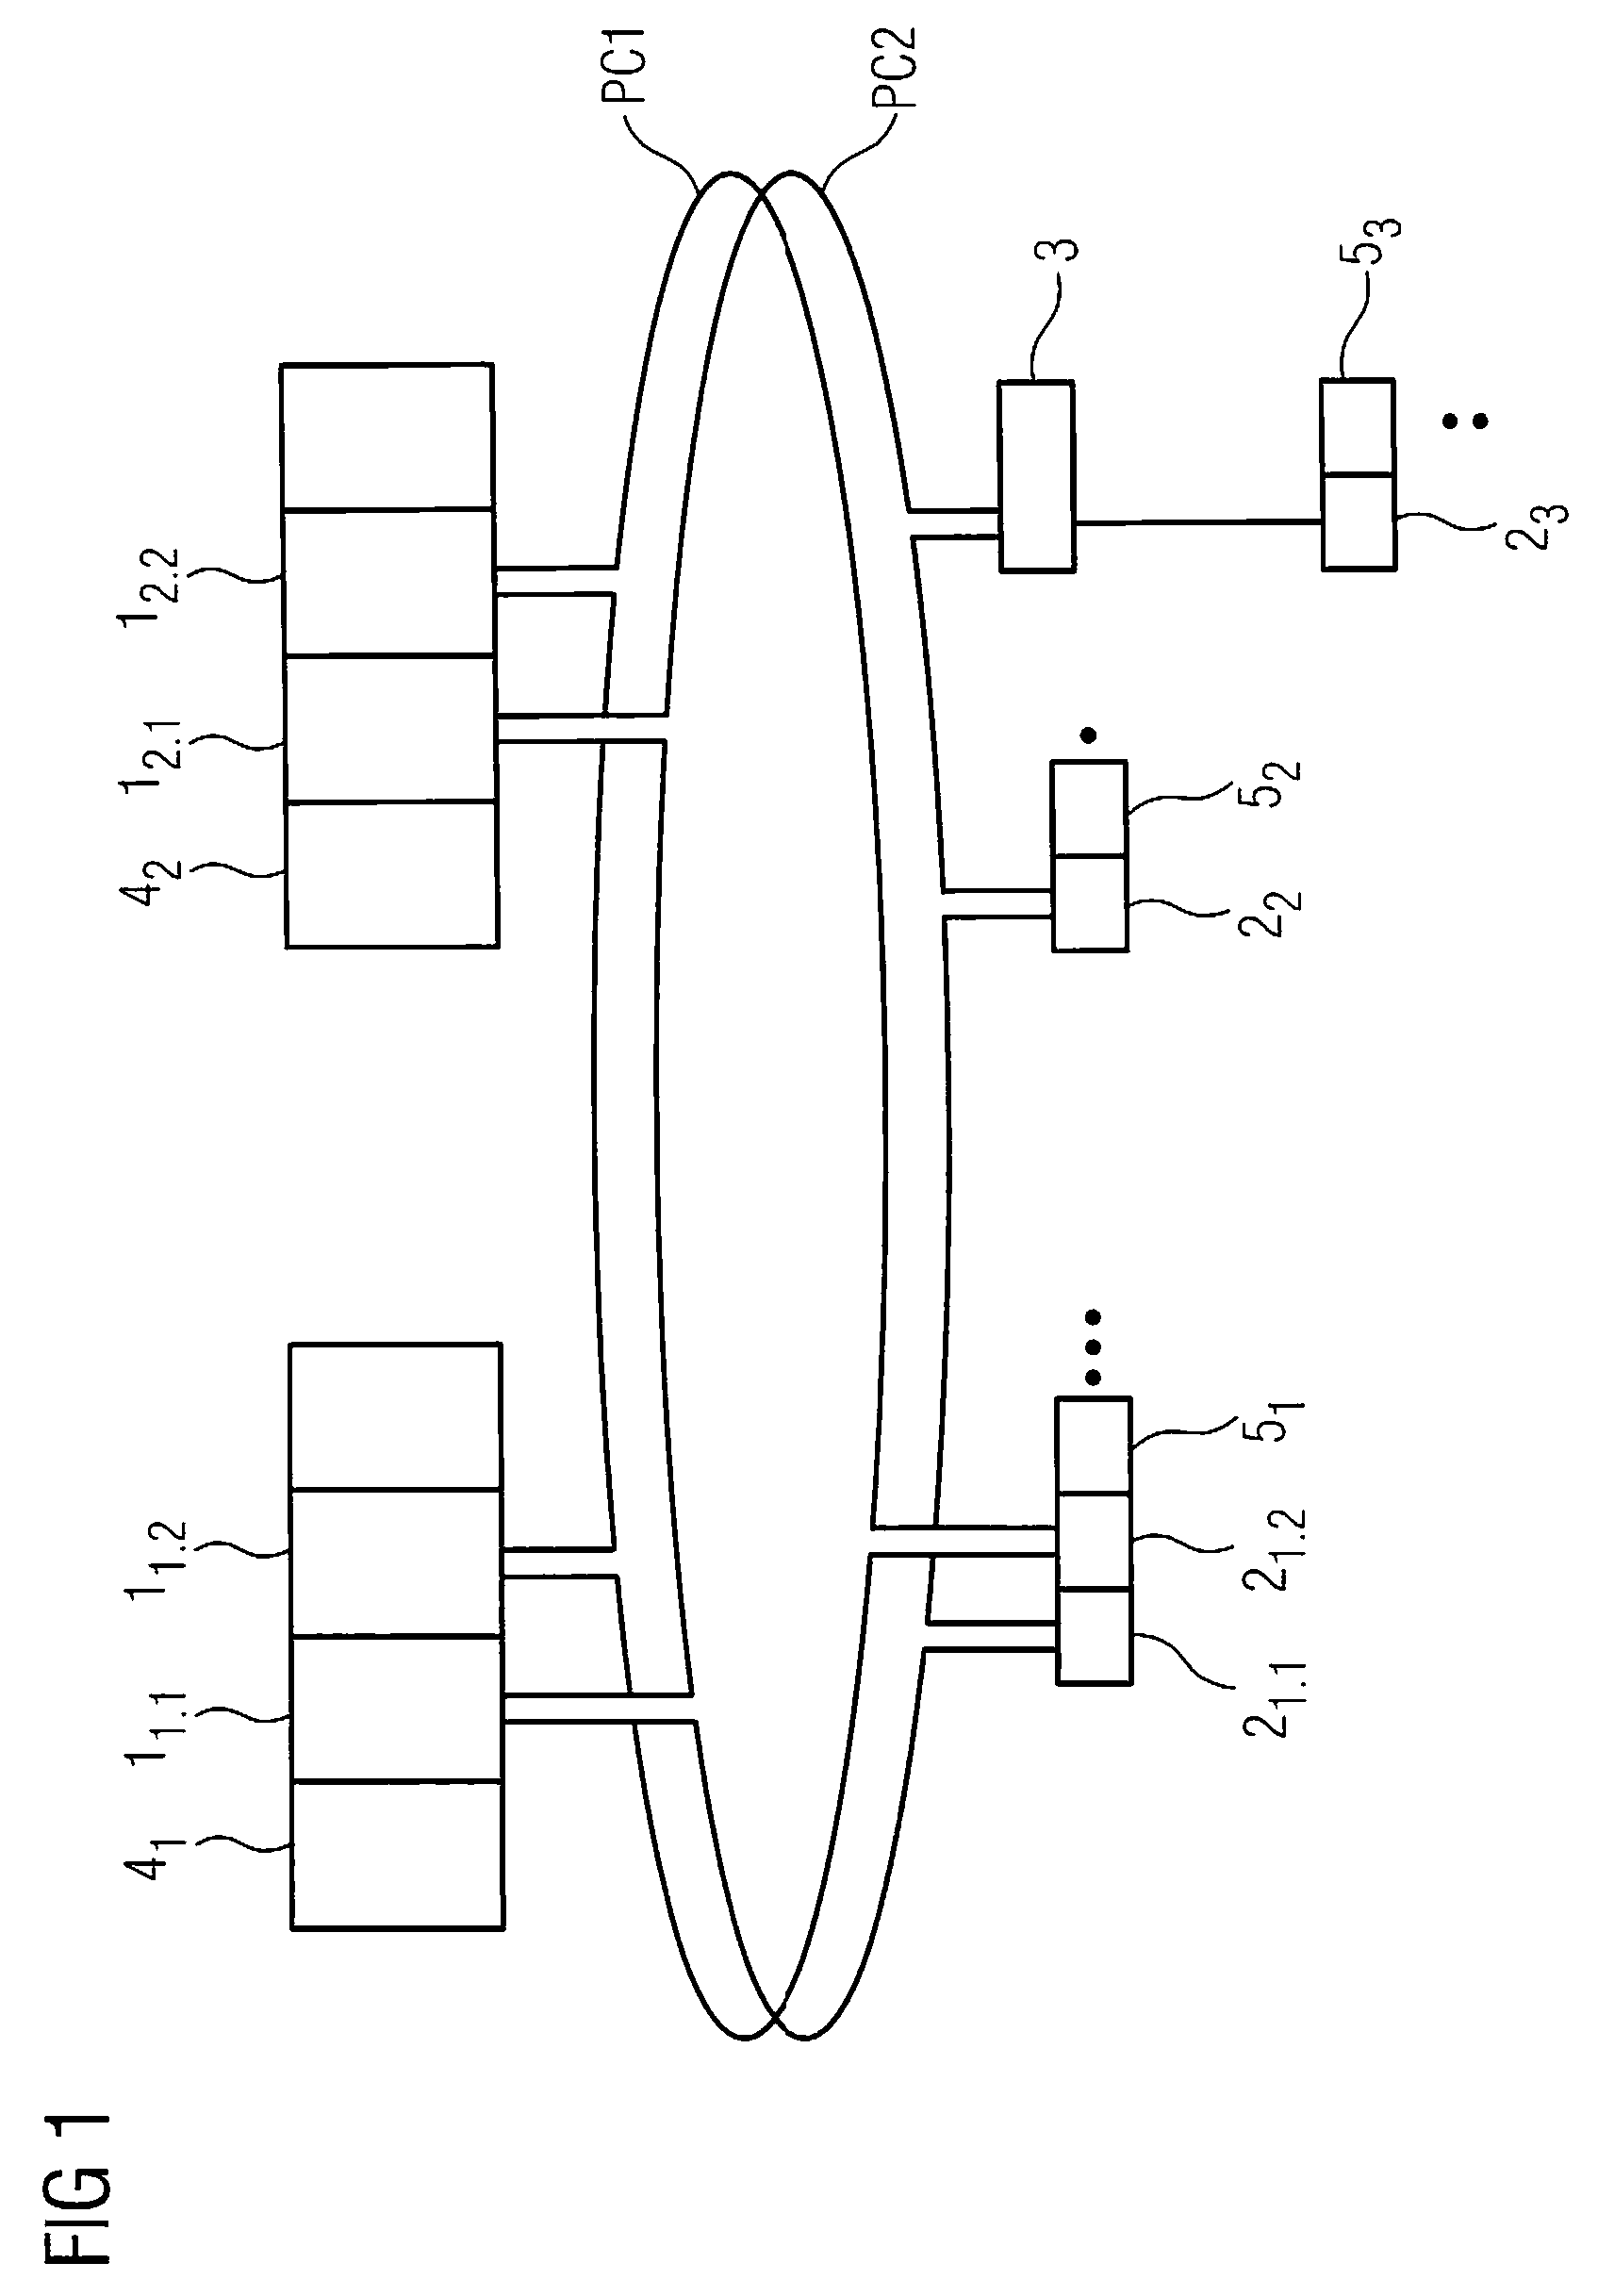 High-availability communication system